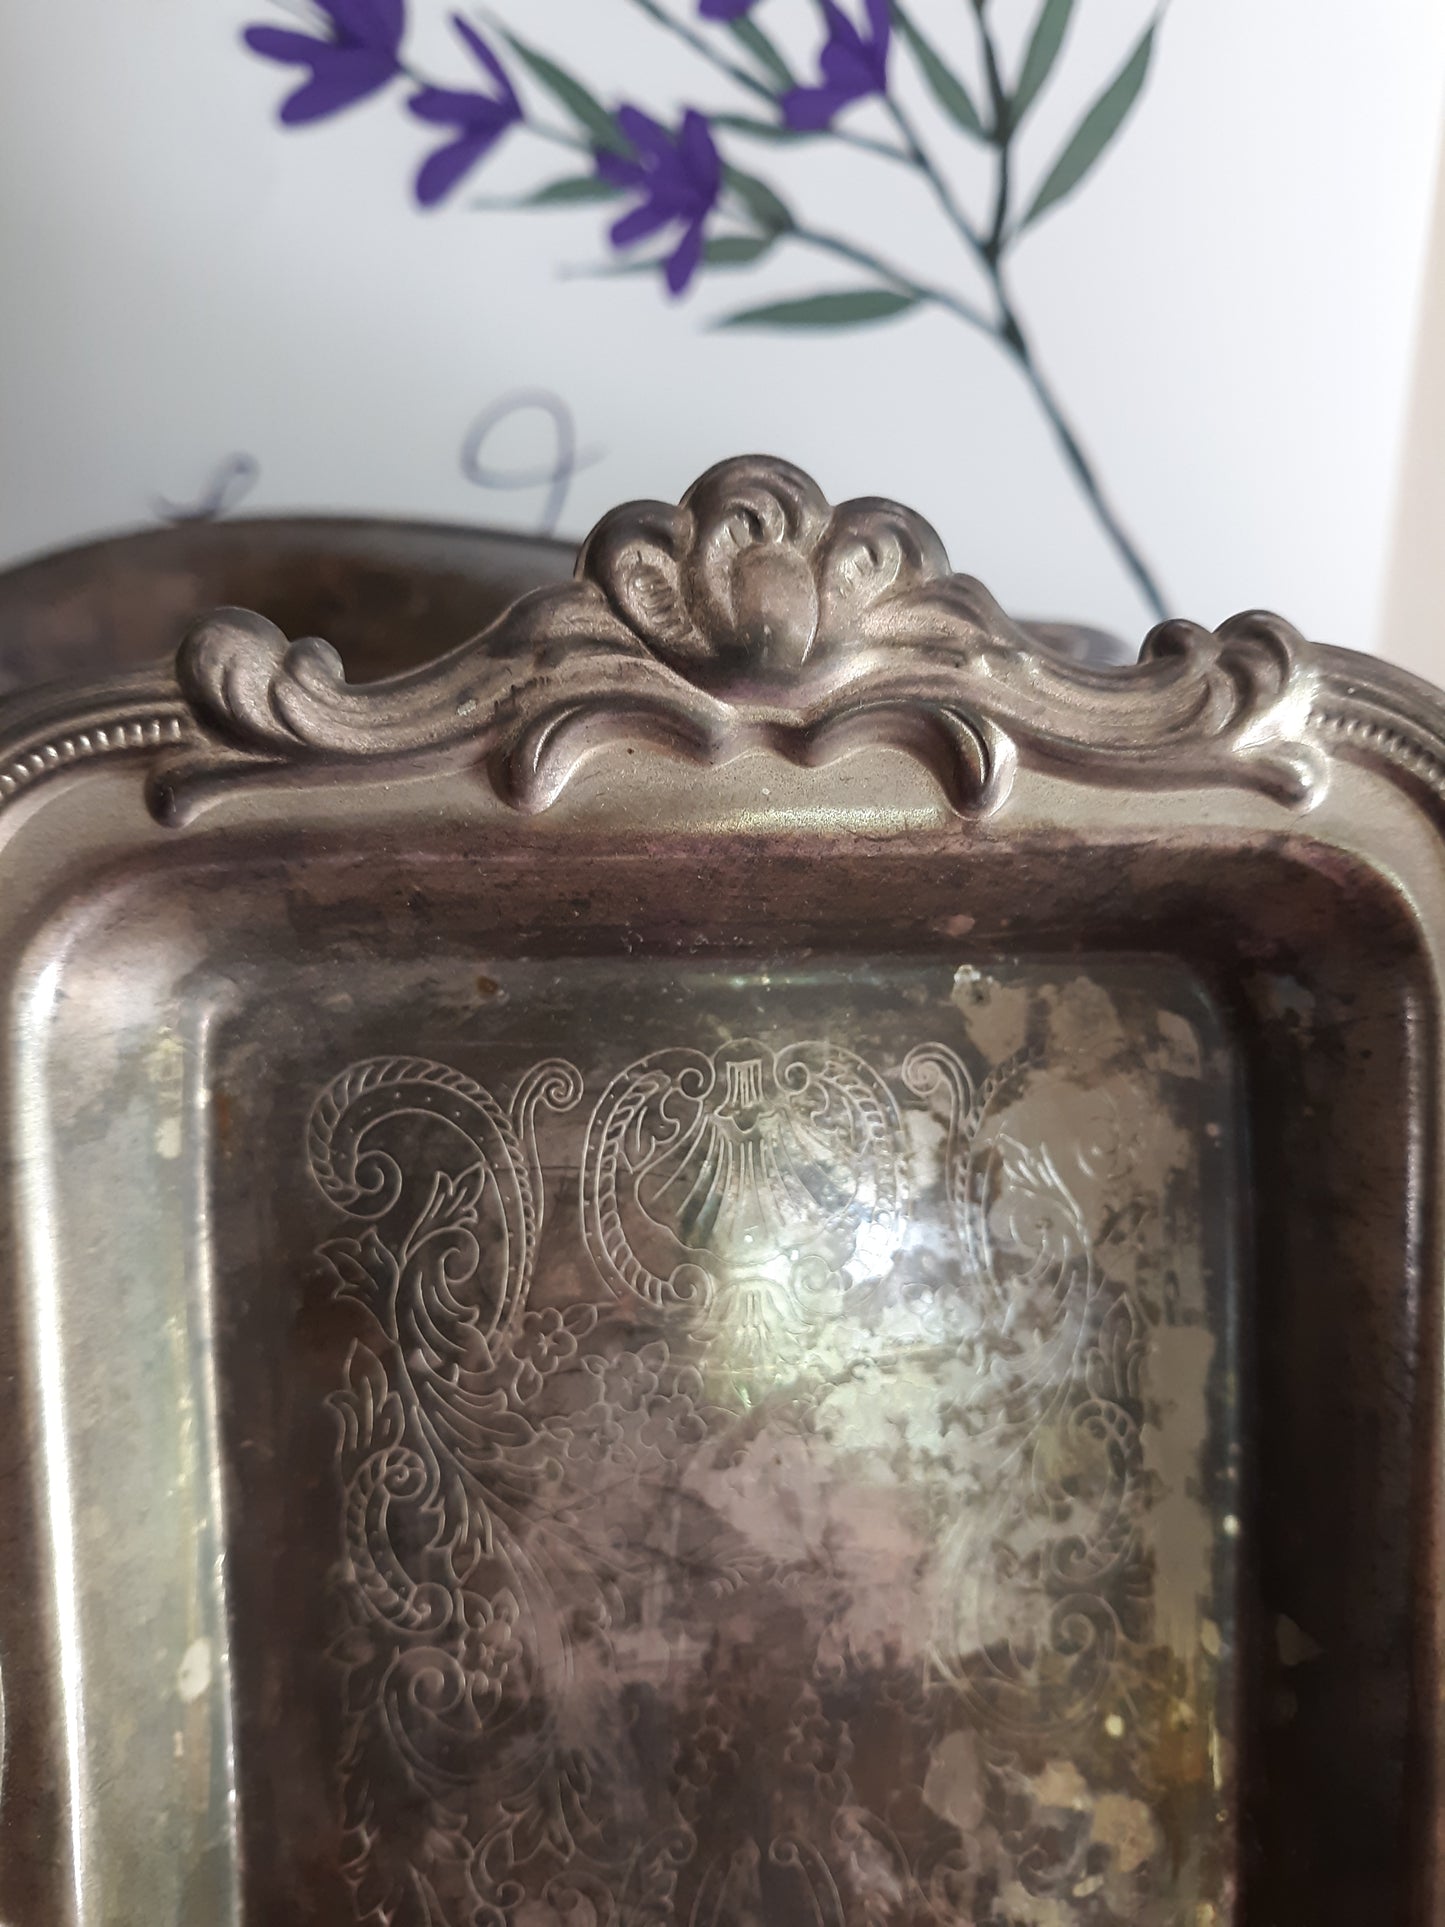 Vintage Silver Plate Tray